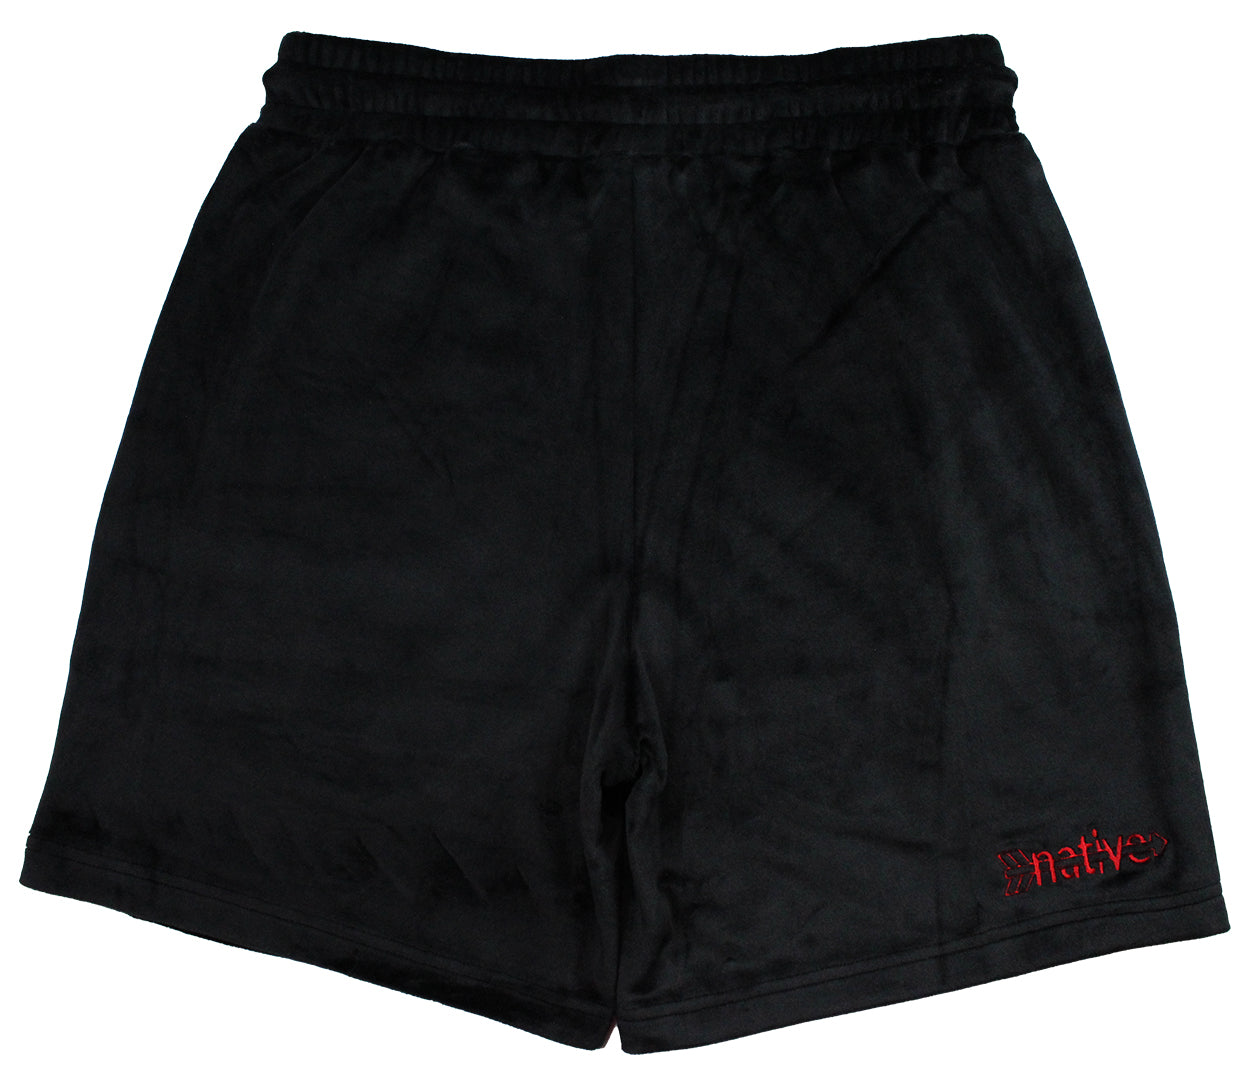 velour shorts in black/red with kilroys on kirkwood